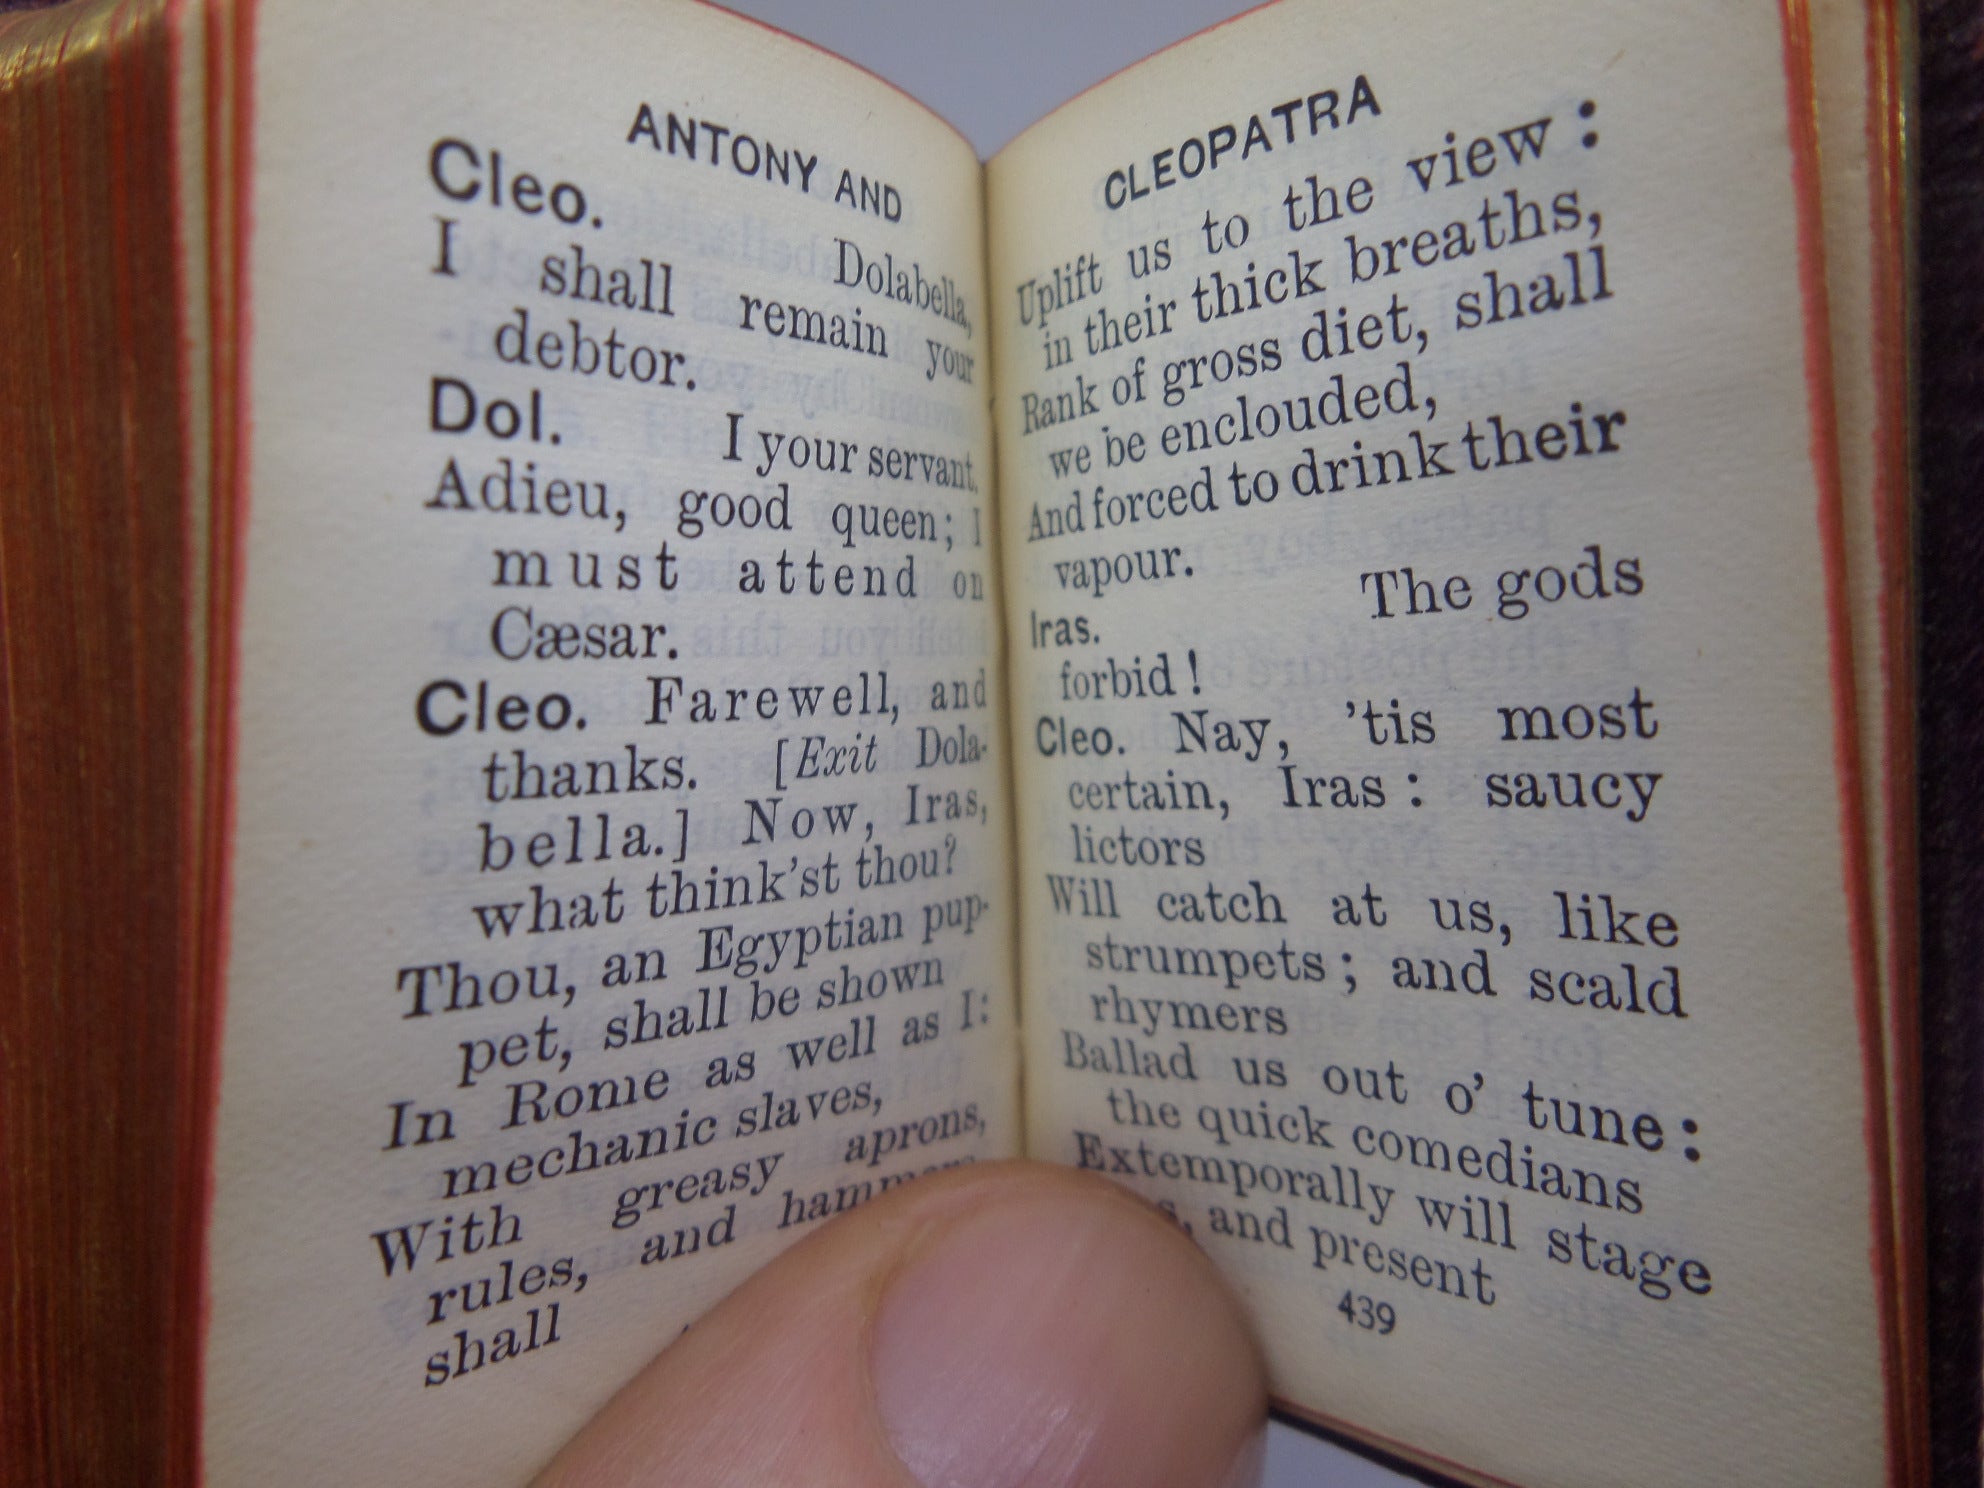 ANTONY AND CLEOPATRA BY WILLIAM SHAKESPEARE, MINIATURE EDITION, LEATHER BINDING